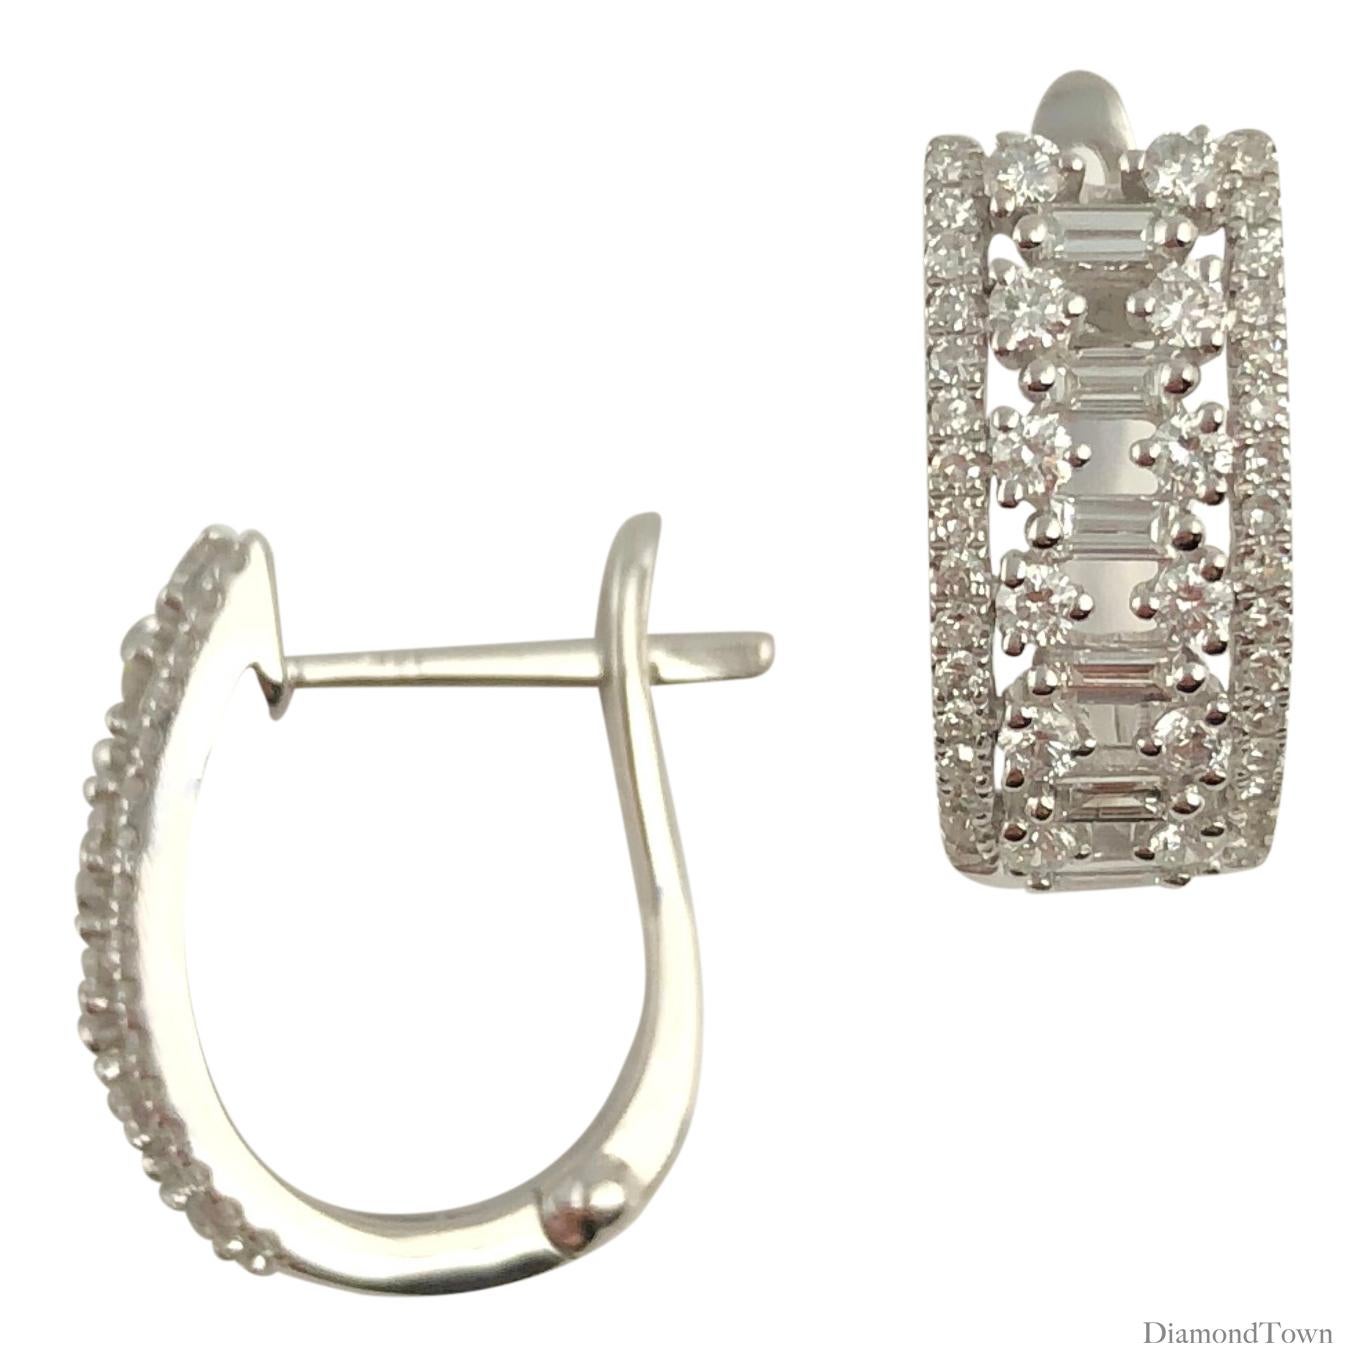 These diamond hoop earrings shine with 0.70 carats layered baguette and round diamonds, set in 14k White Gold. A perfect bridal accompaniment or gift.

Many of our items have matching companion pieces. Please inquire.

An insurance appraisal